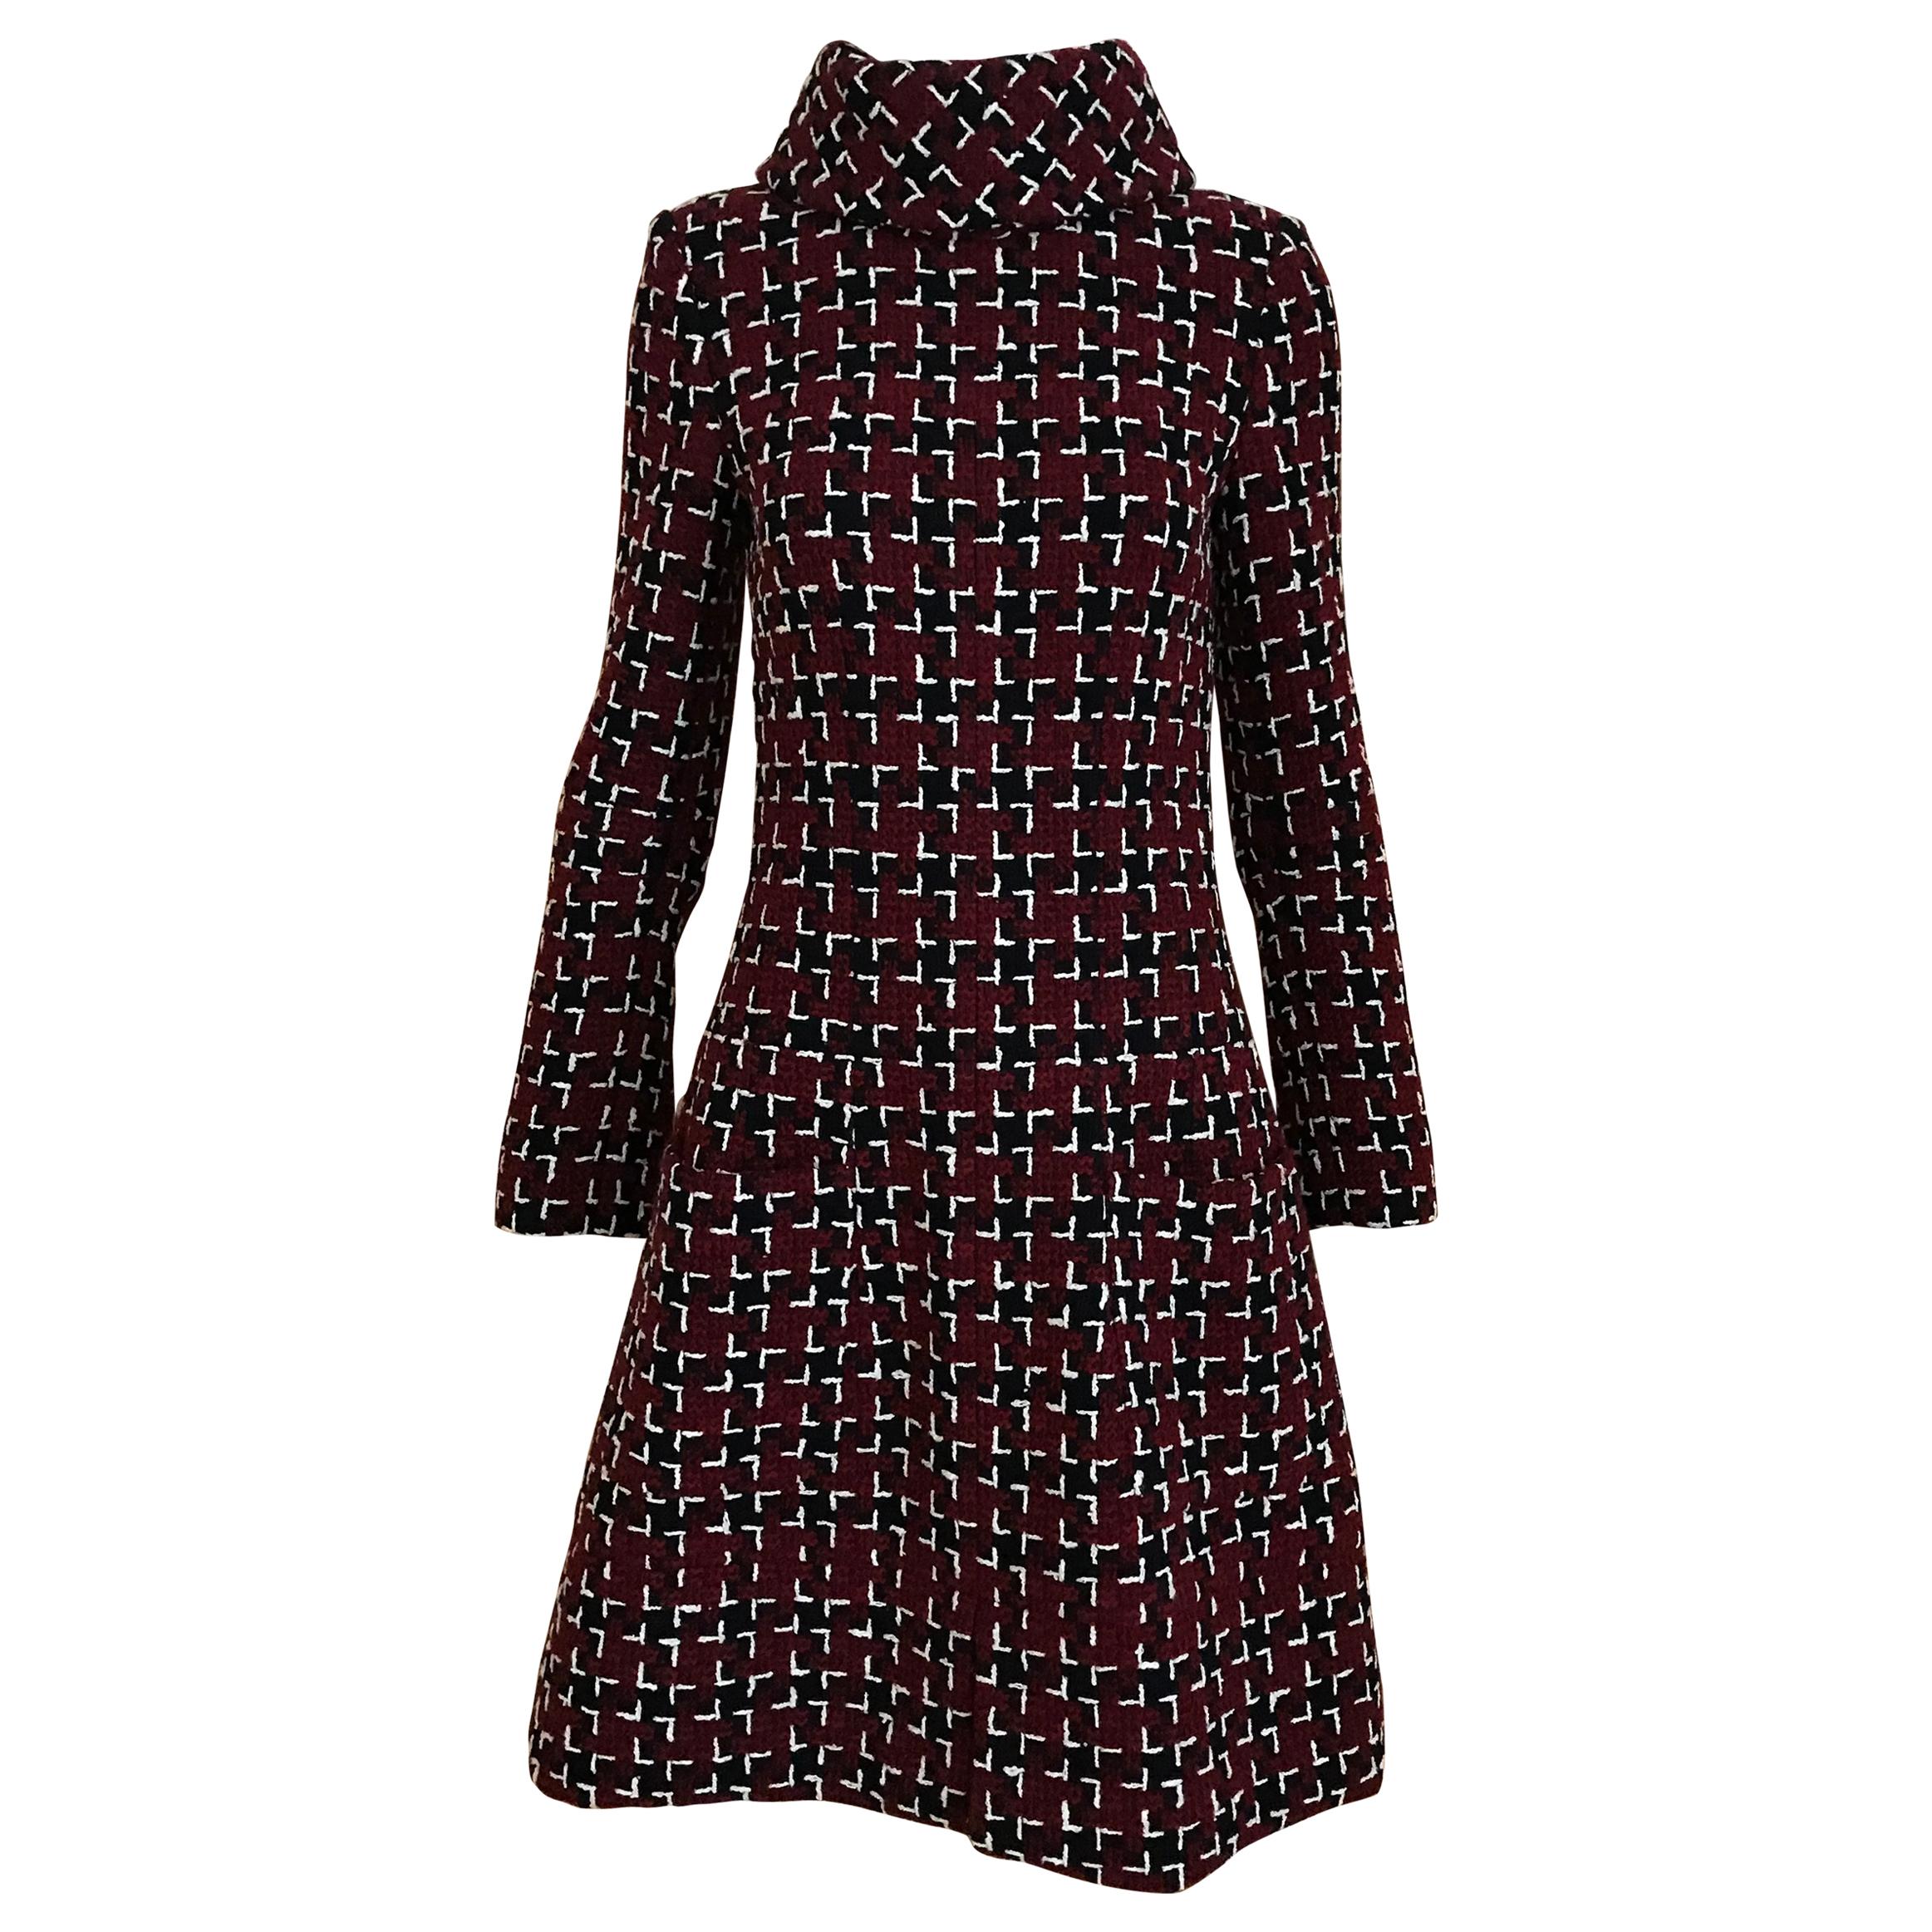 Chanel Cocktail Tweed Dress in Burgundy, Black and White New with tag